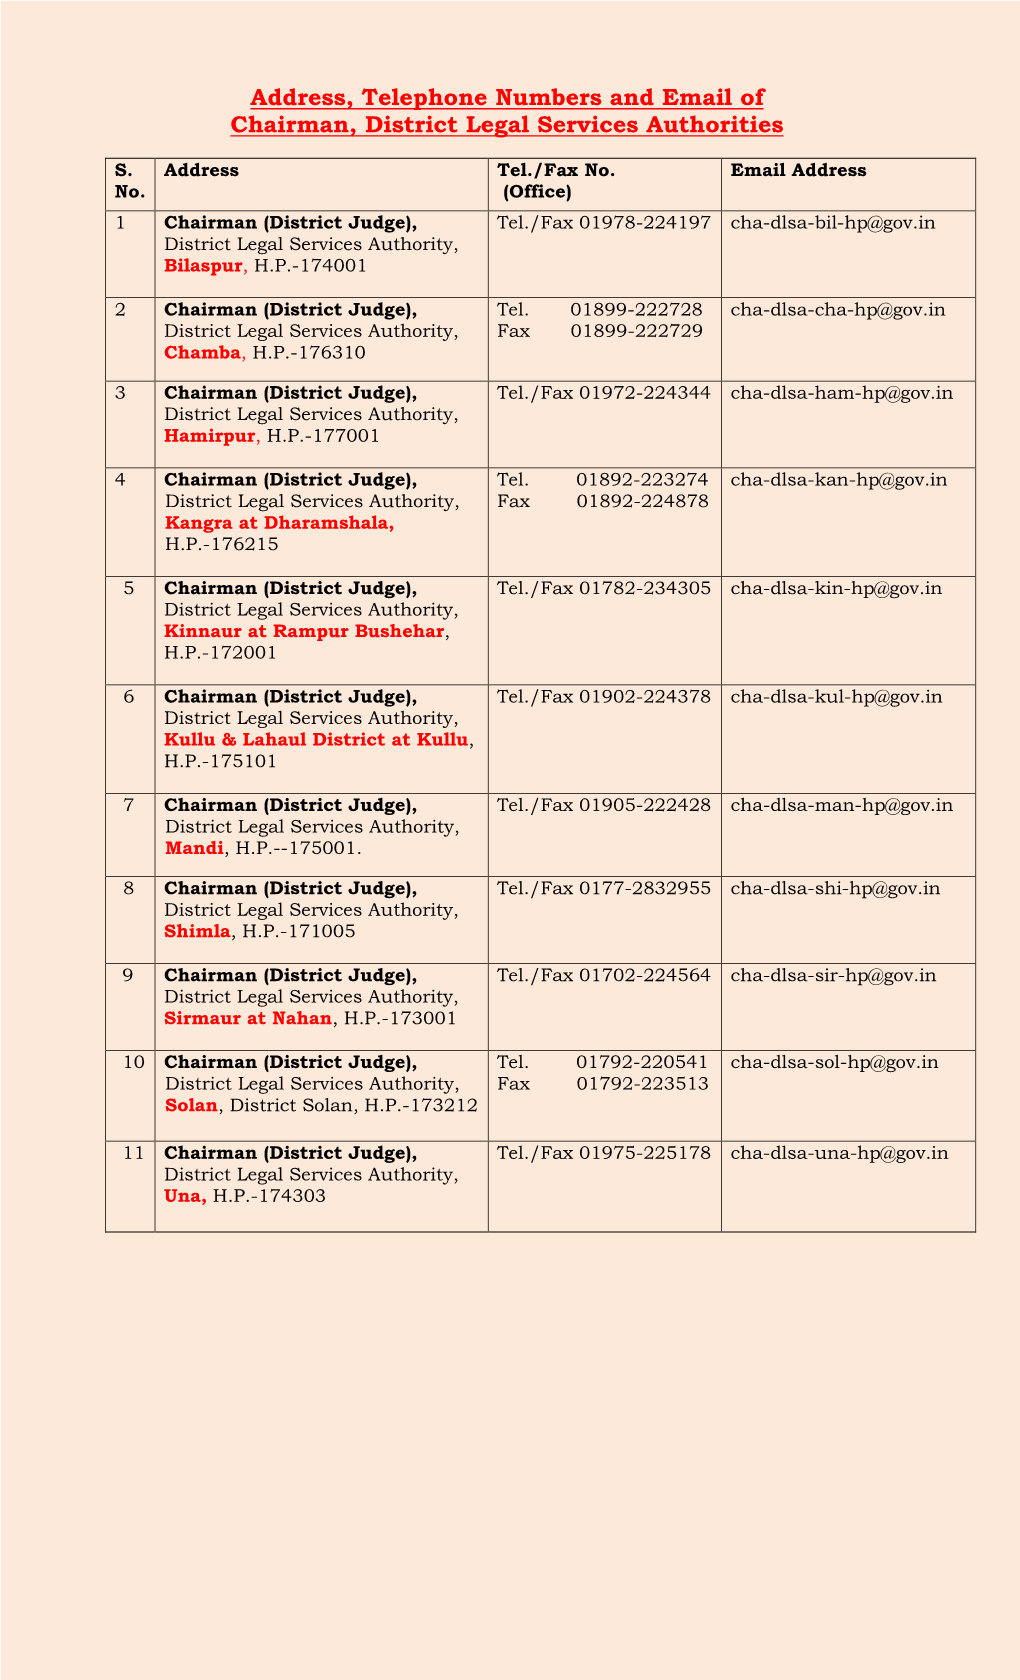 Address, Telephone Numbers and Email of Chairman, District Legal Services Authorities